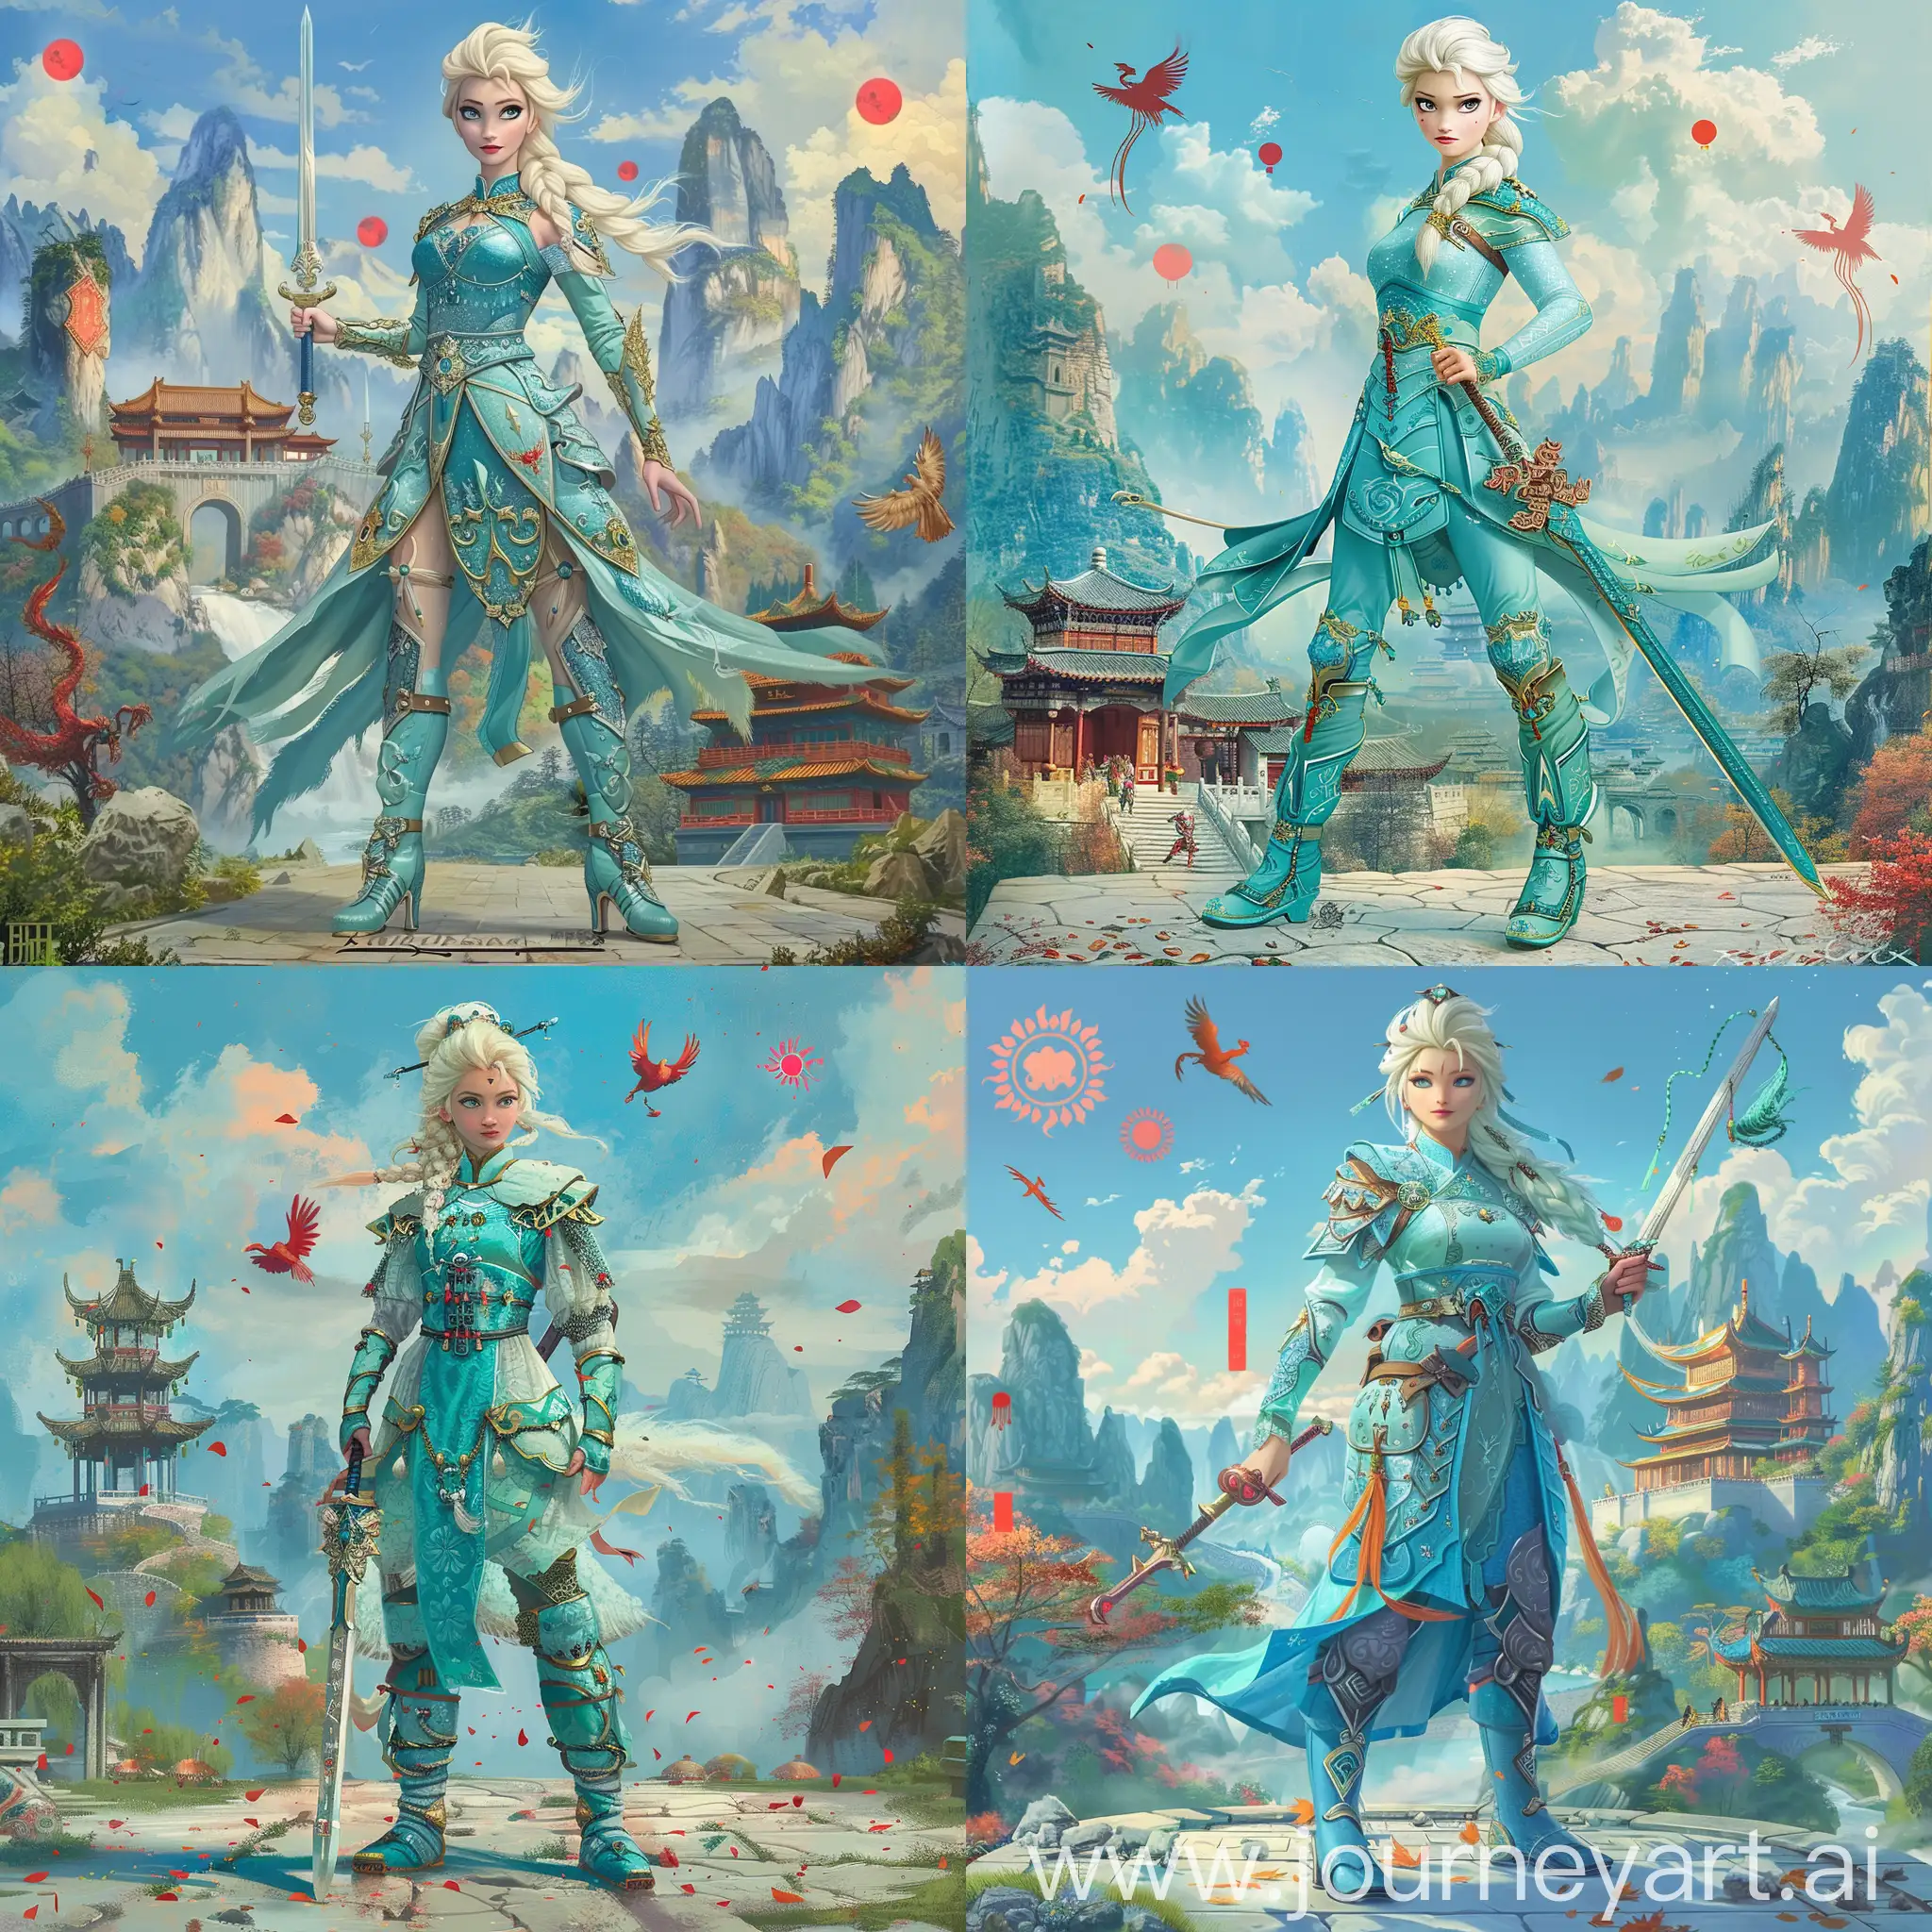 Historic painting style:

a Disney Norwegian Princess Elsa, she wears light blue and turquoise color Chinese style medieval armor and boots, she holds a Chinese sword in right hand, 

Chinese Guilin mountains and temple as background, small phoenix and three small red suns in blue sky.